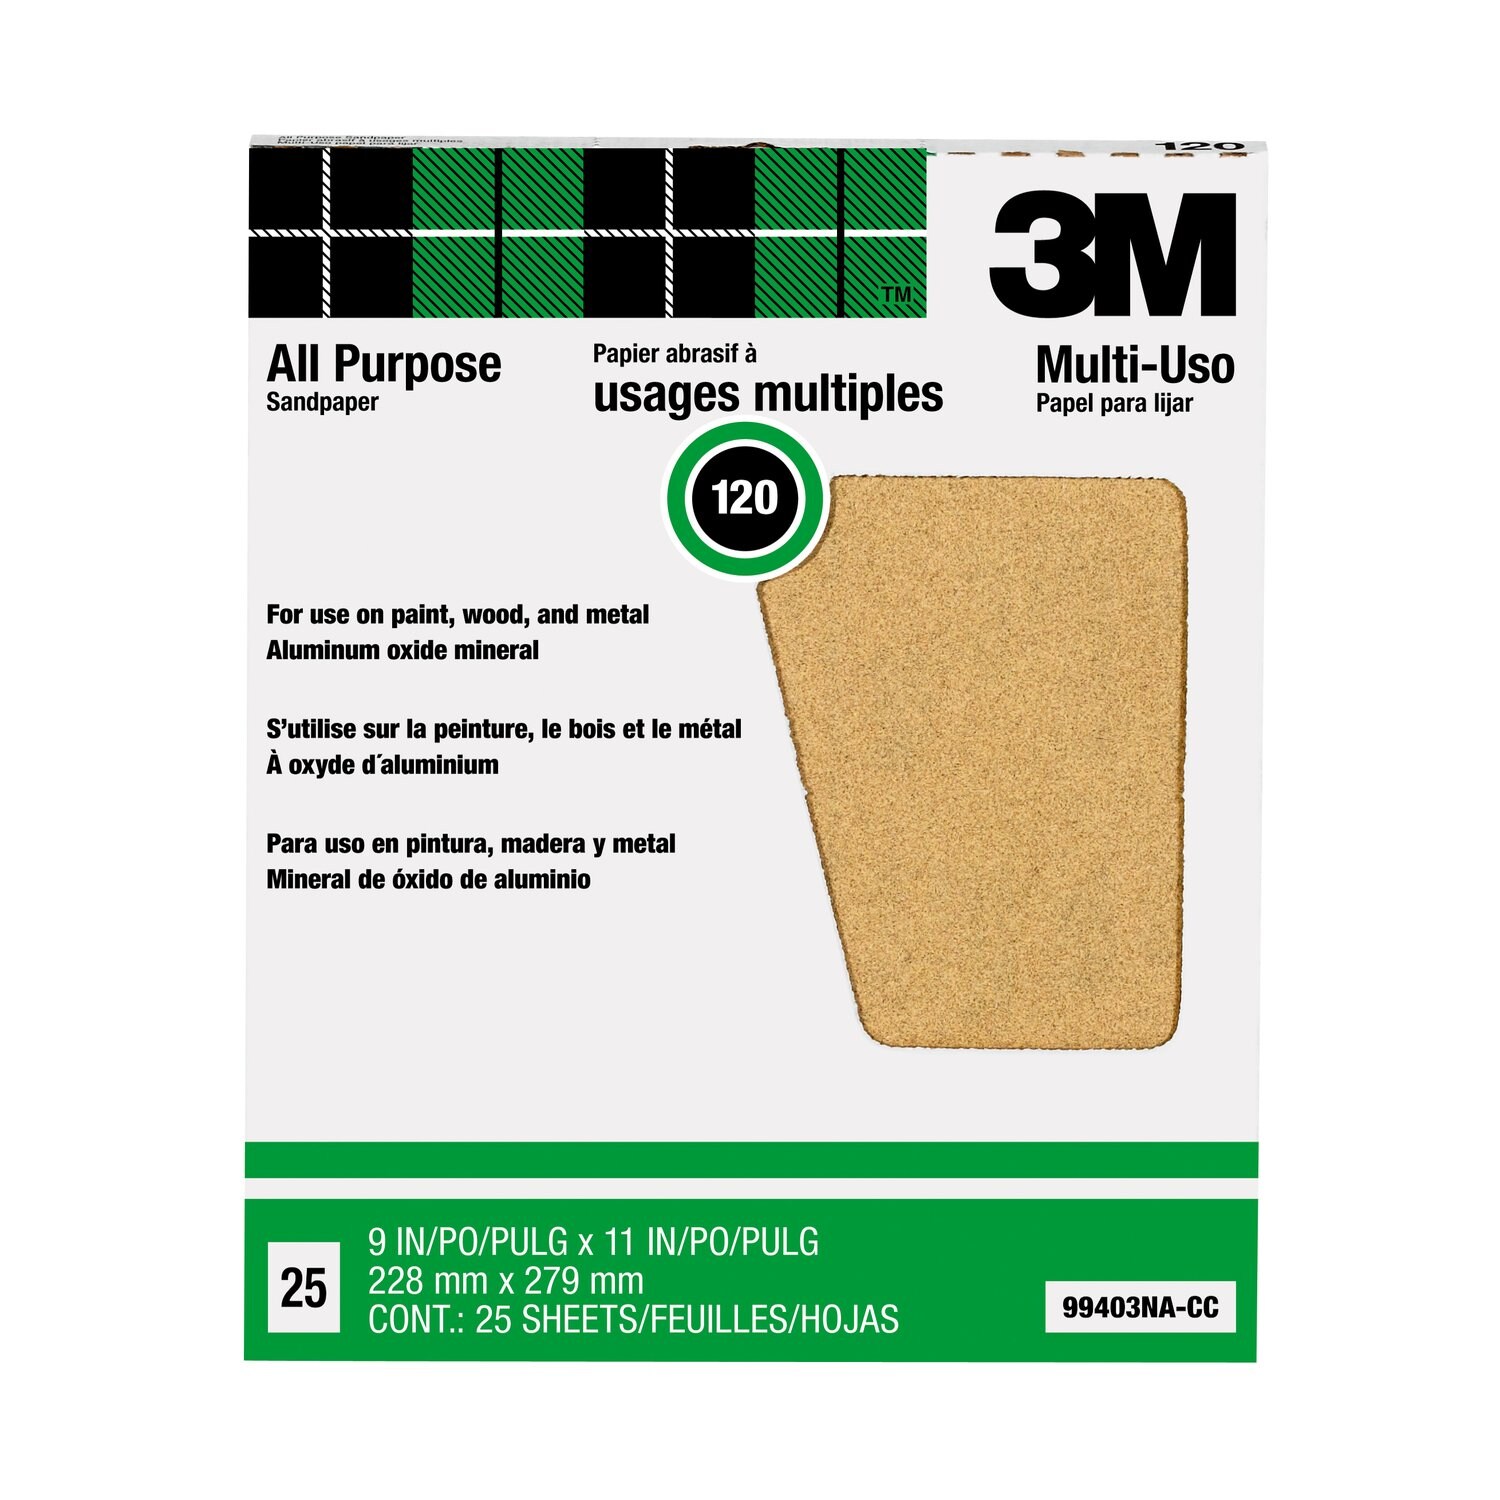 7000126517 - 3M Pro-Pak Aluminum Oxide Sheets for Paint and Rust Removal, 9 in x 11
in, 120 grit, 10 packs/cap case, Open Stock